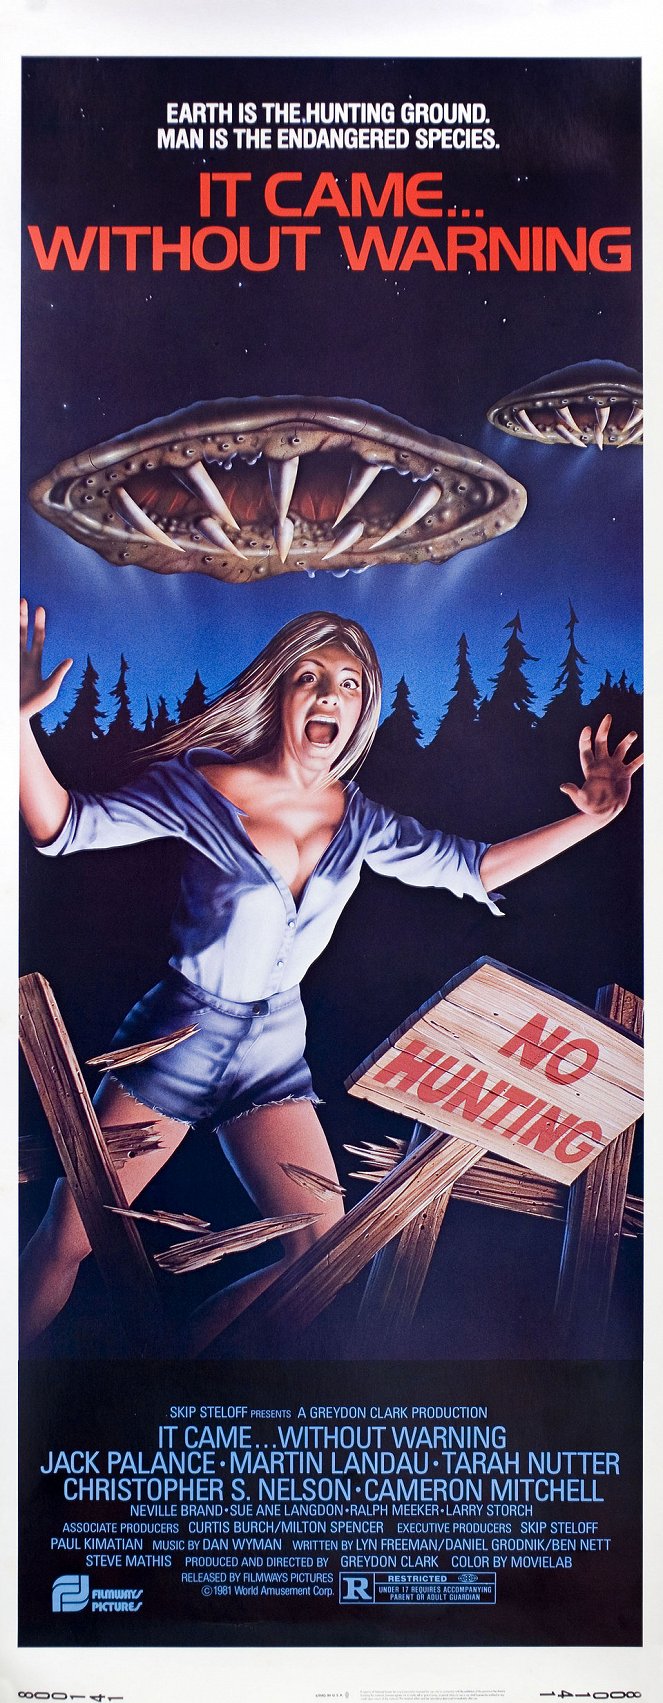 Without Warning - Posters